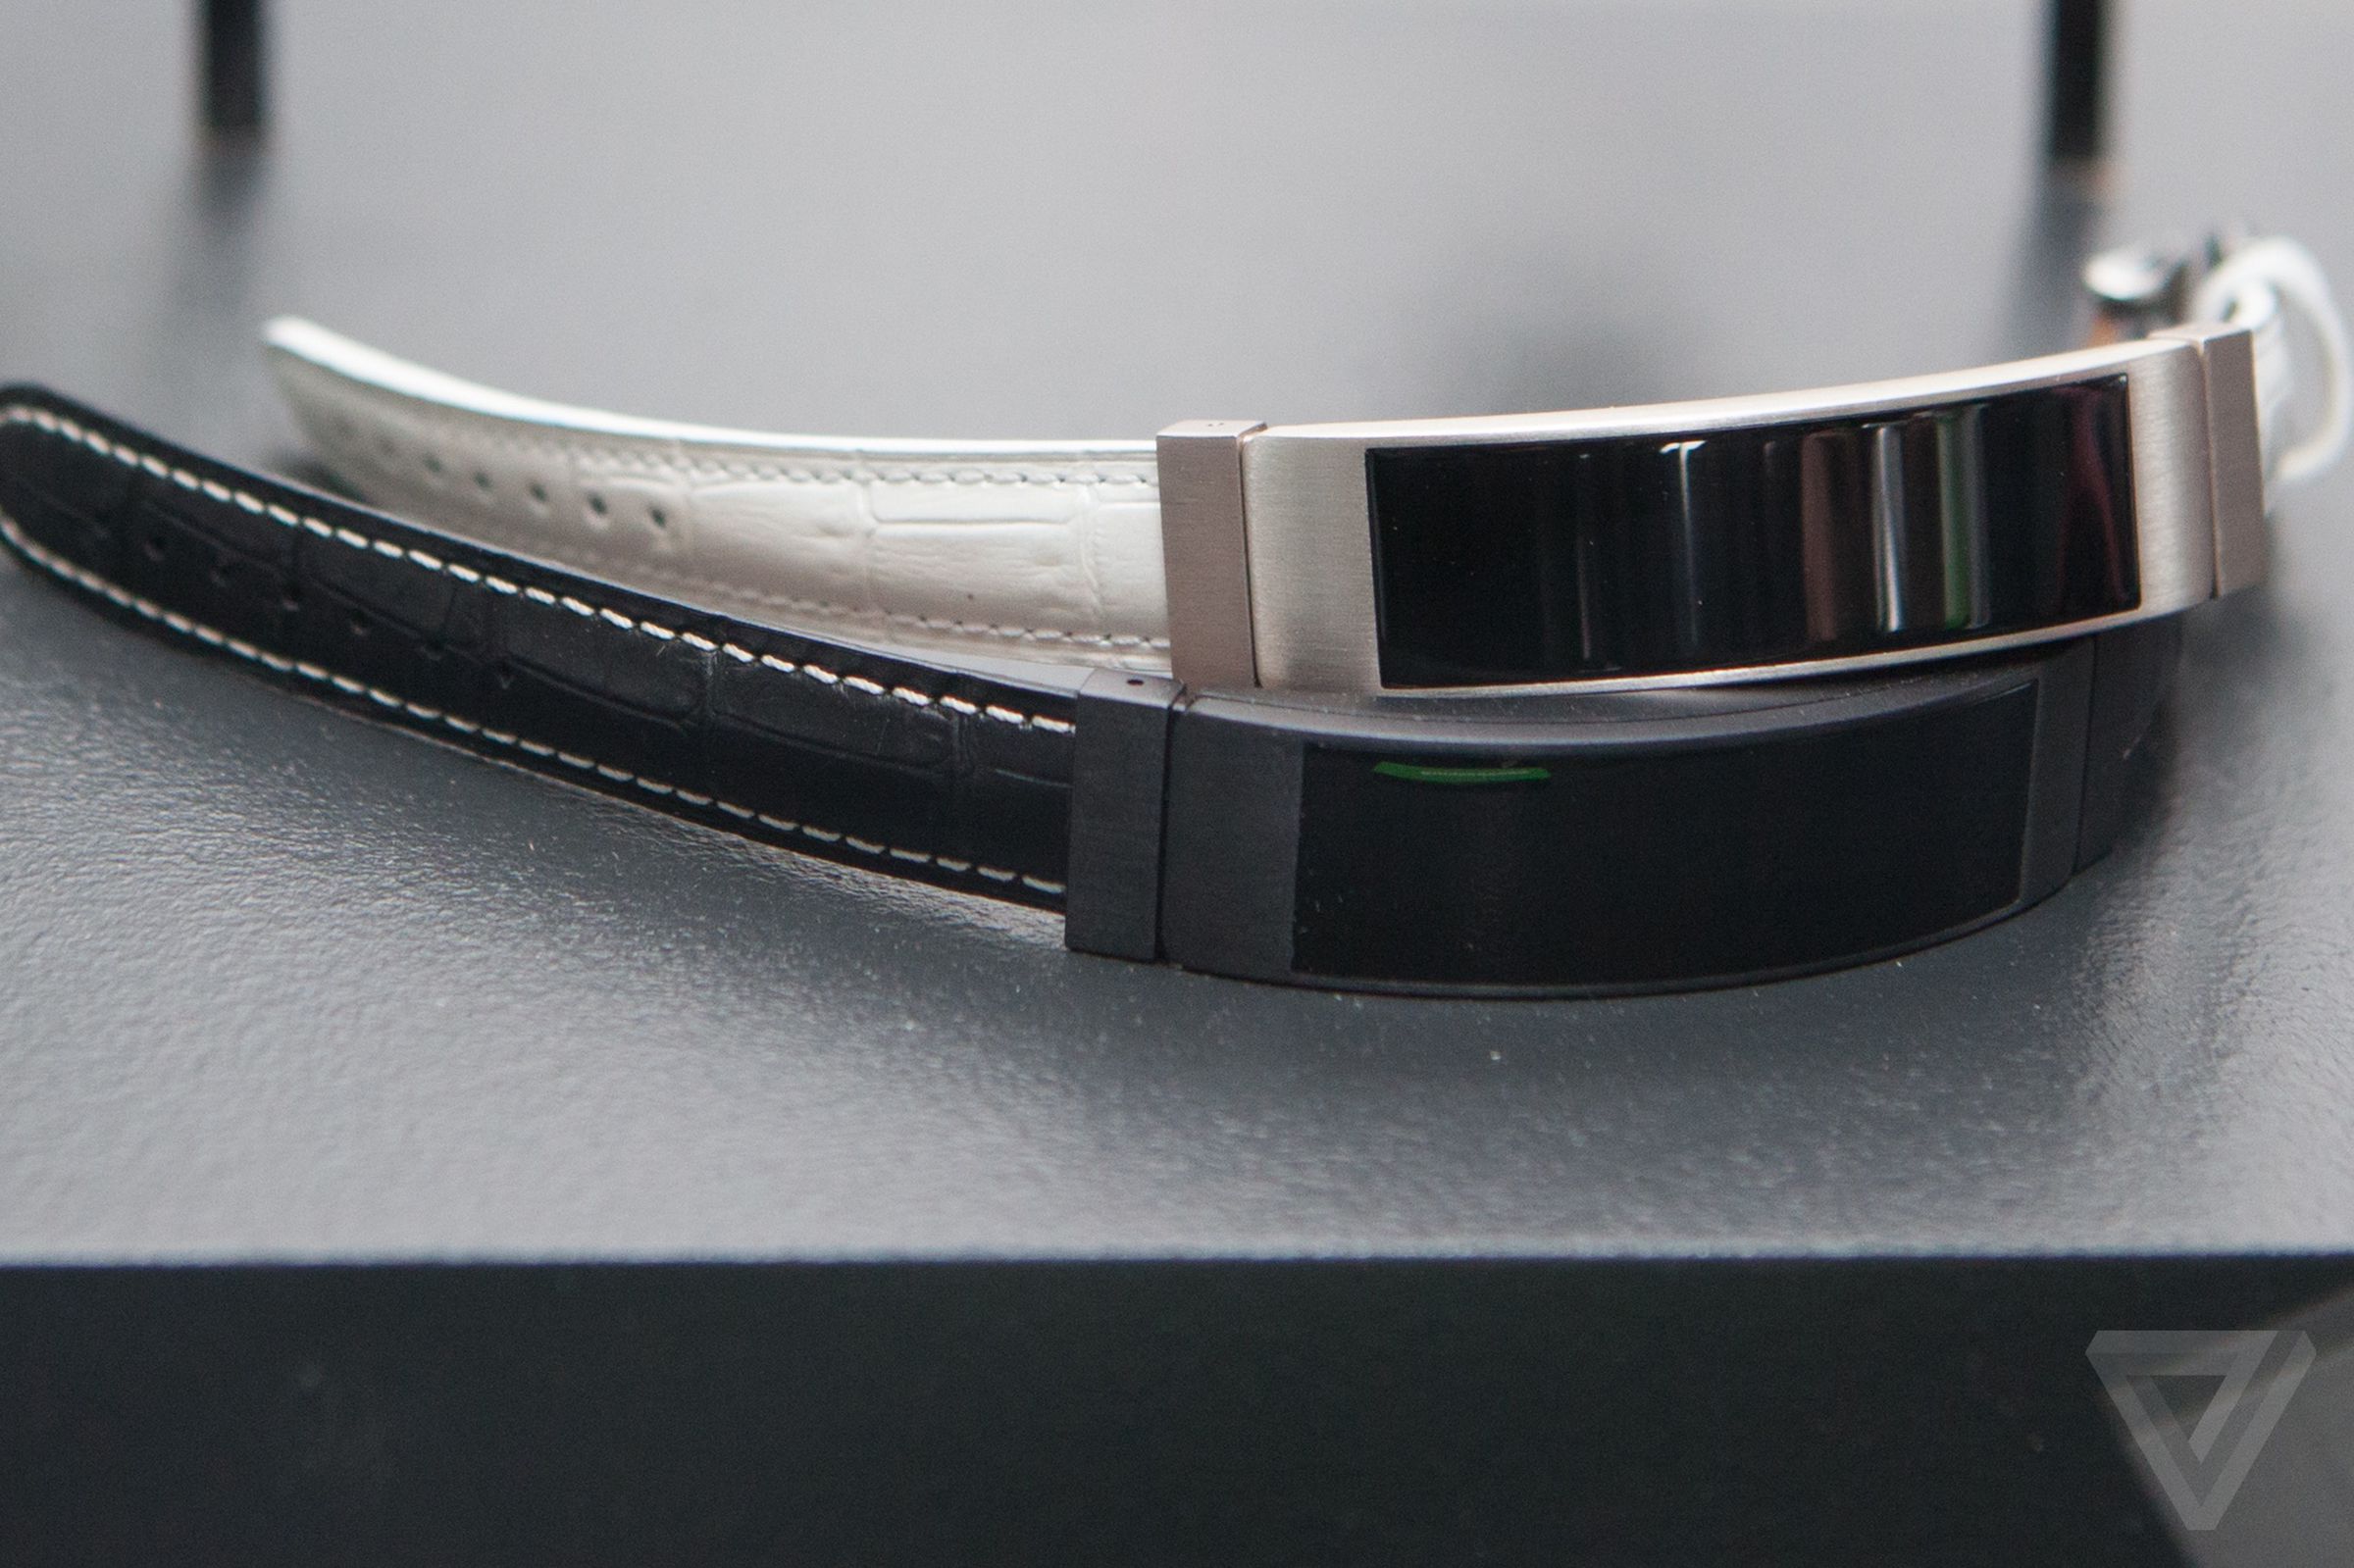 Acer 2015 wearables hands-on photos